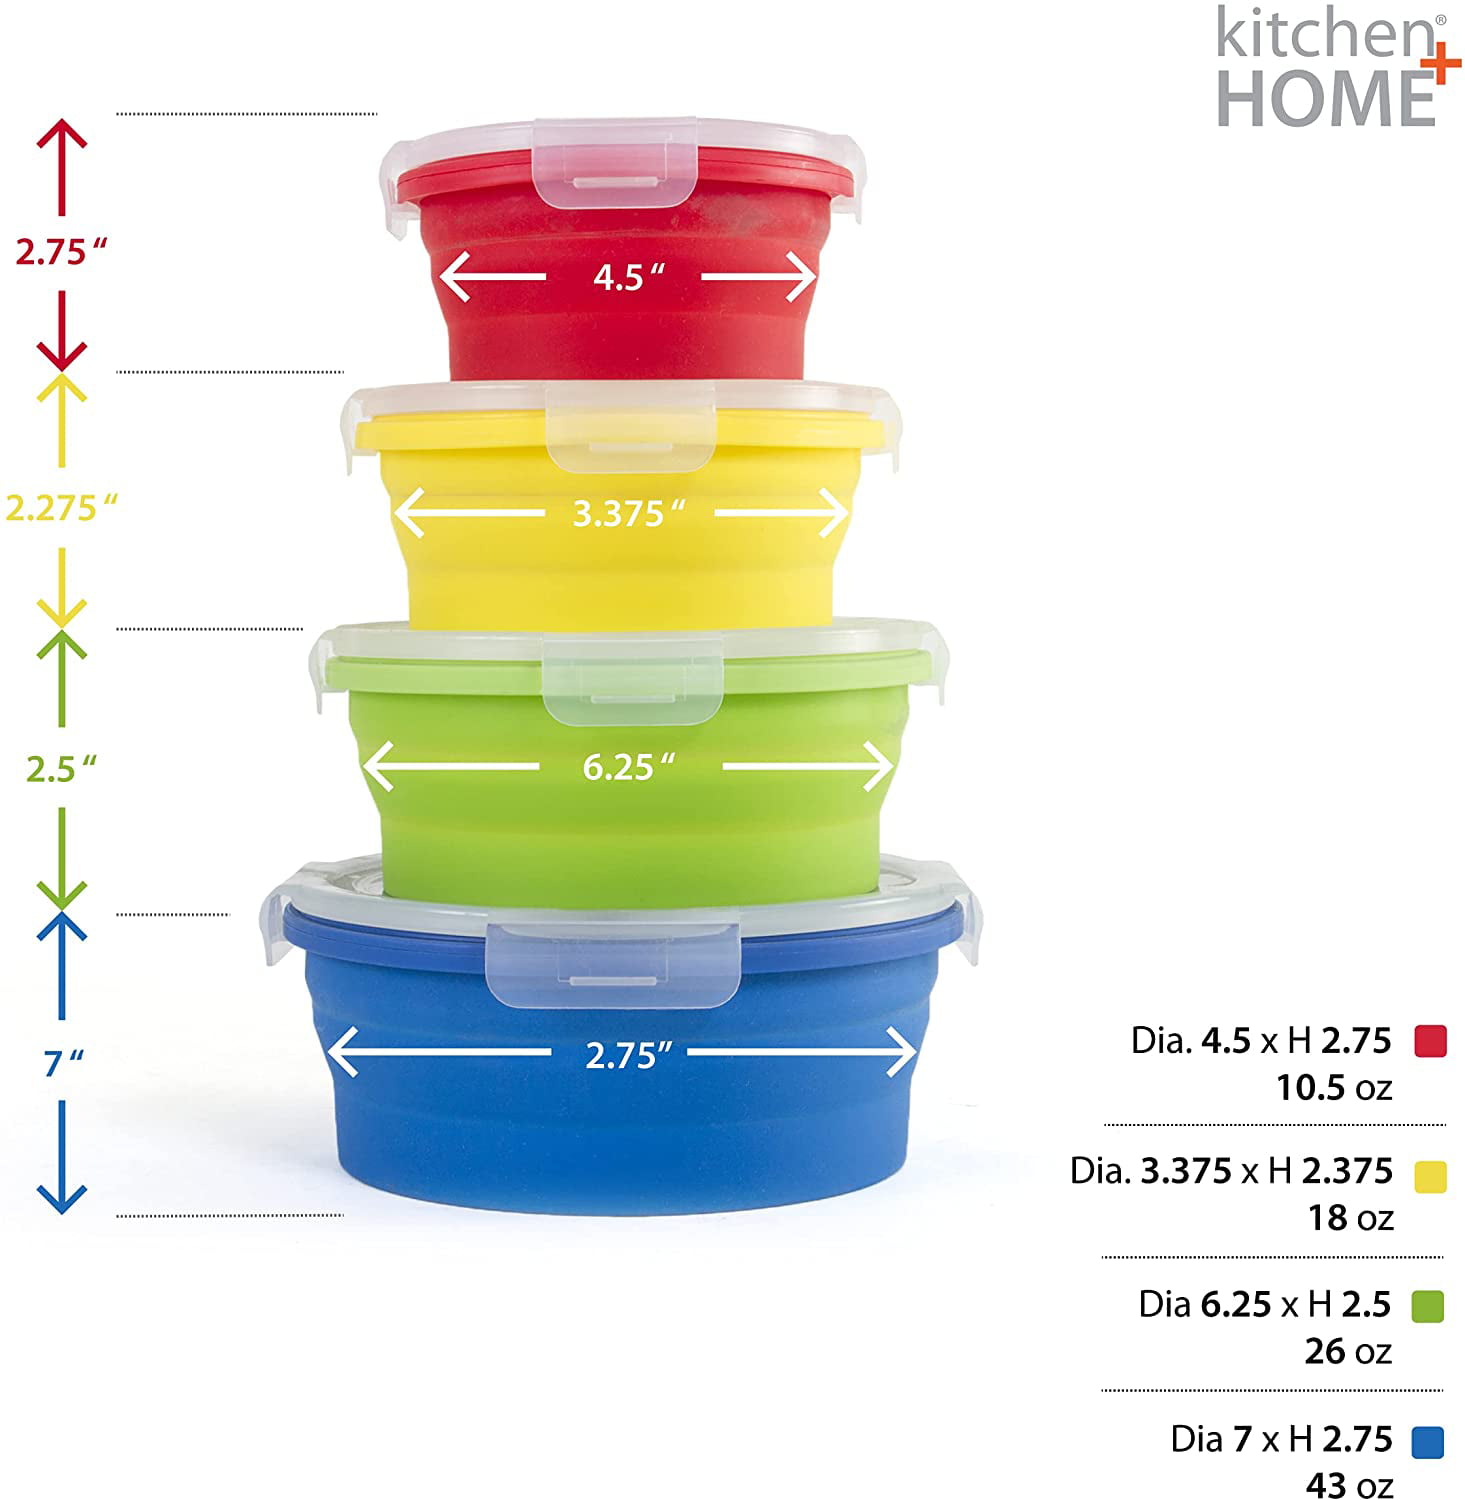 4-Pkg Collapsible Silicone Container - Combo - Blue - Minimal